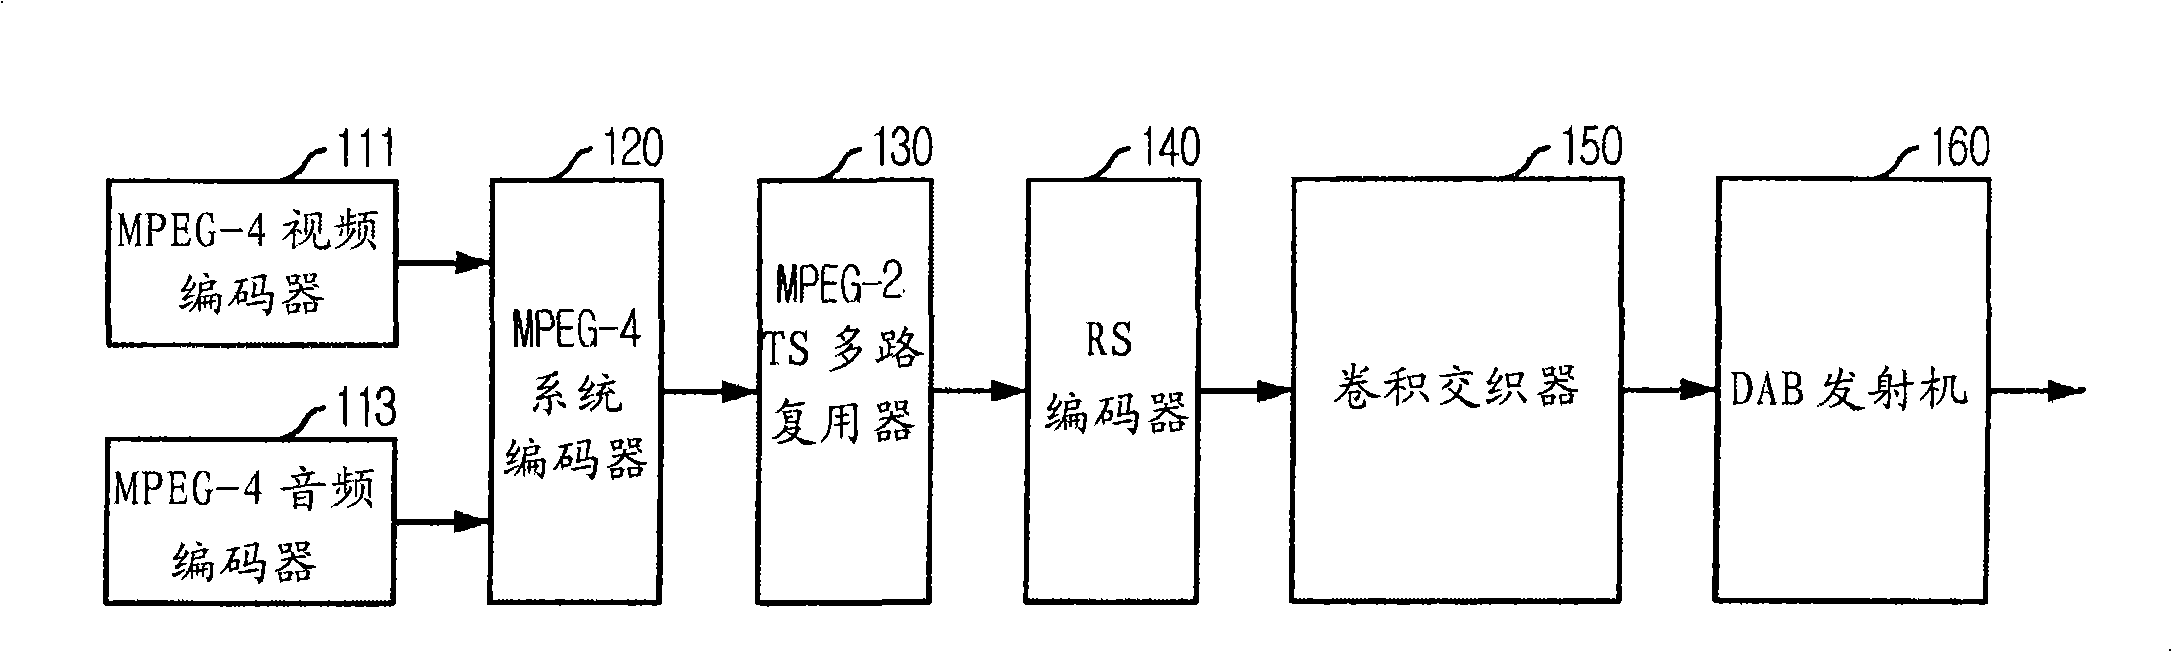 Apparatus for transmitting and receiving digital multimedia broadcasting for high-quality video service